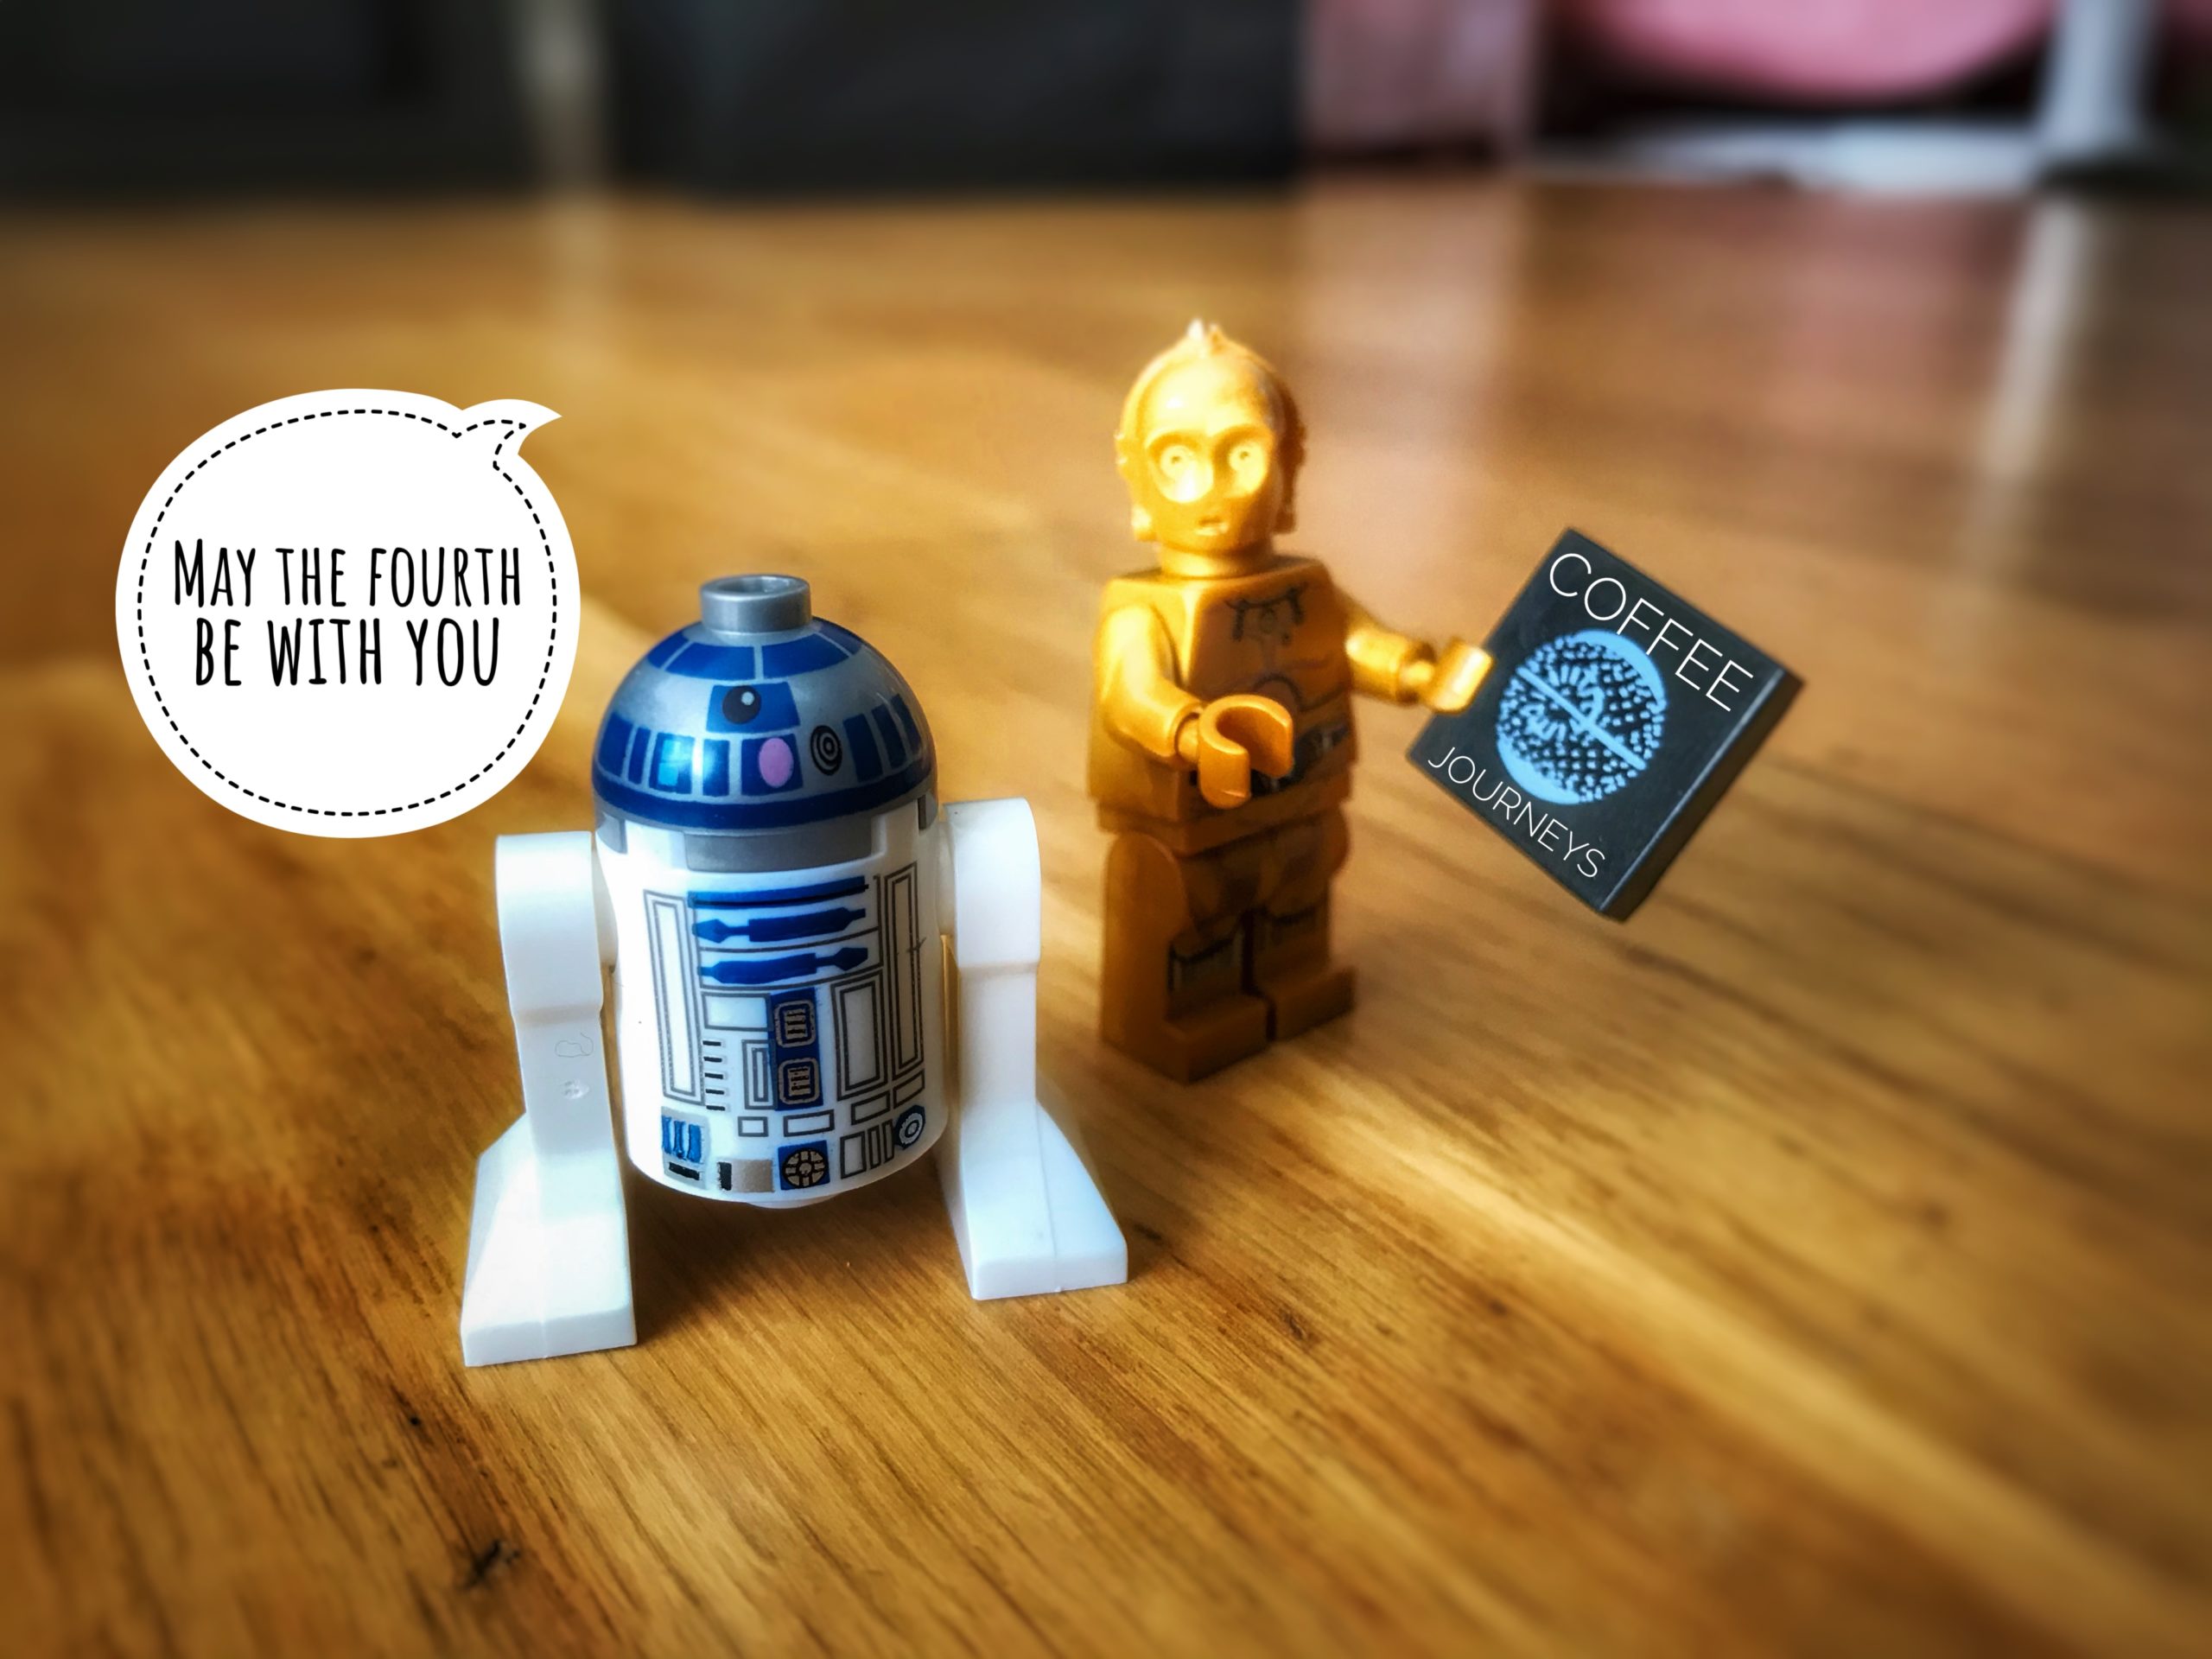 May the fourth be with you - R2D2